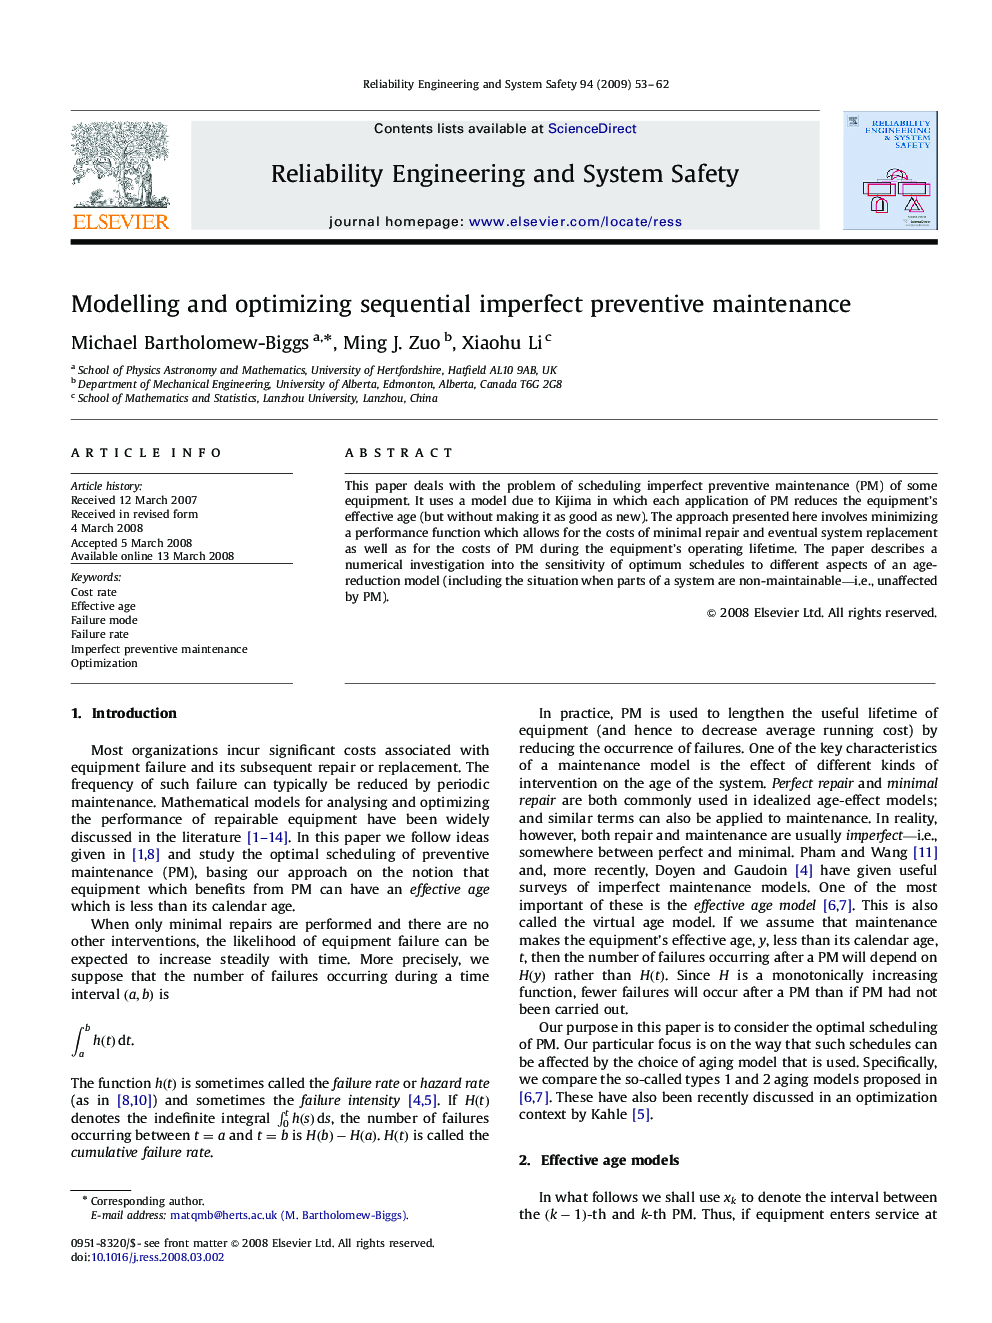 Modelling and optimizing sequential imperfect preventive maintenance